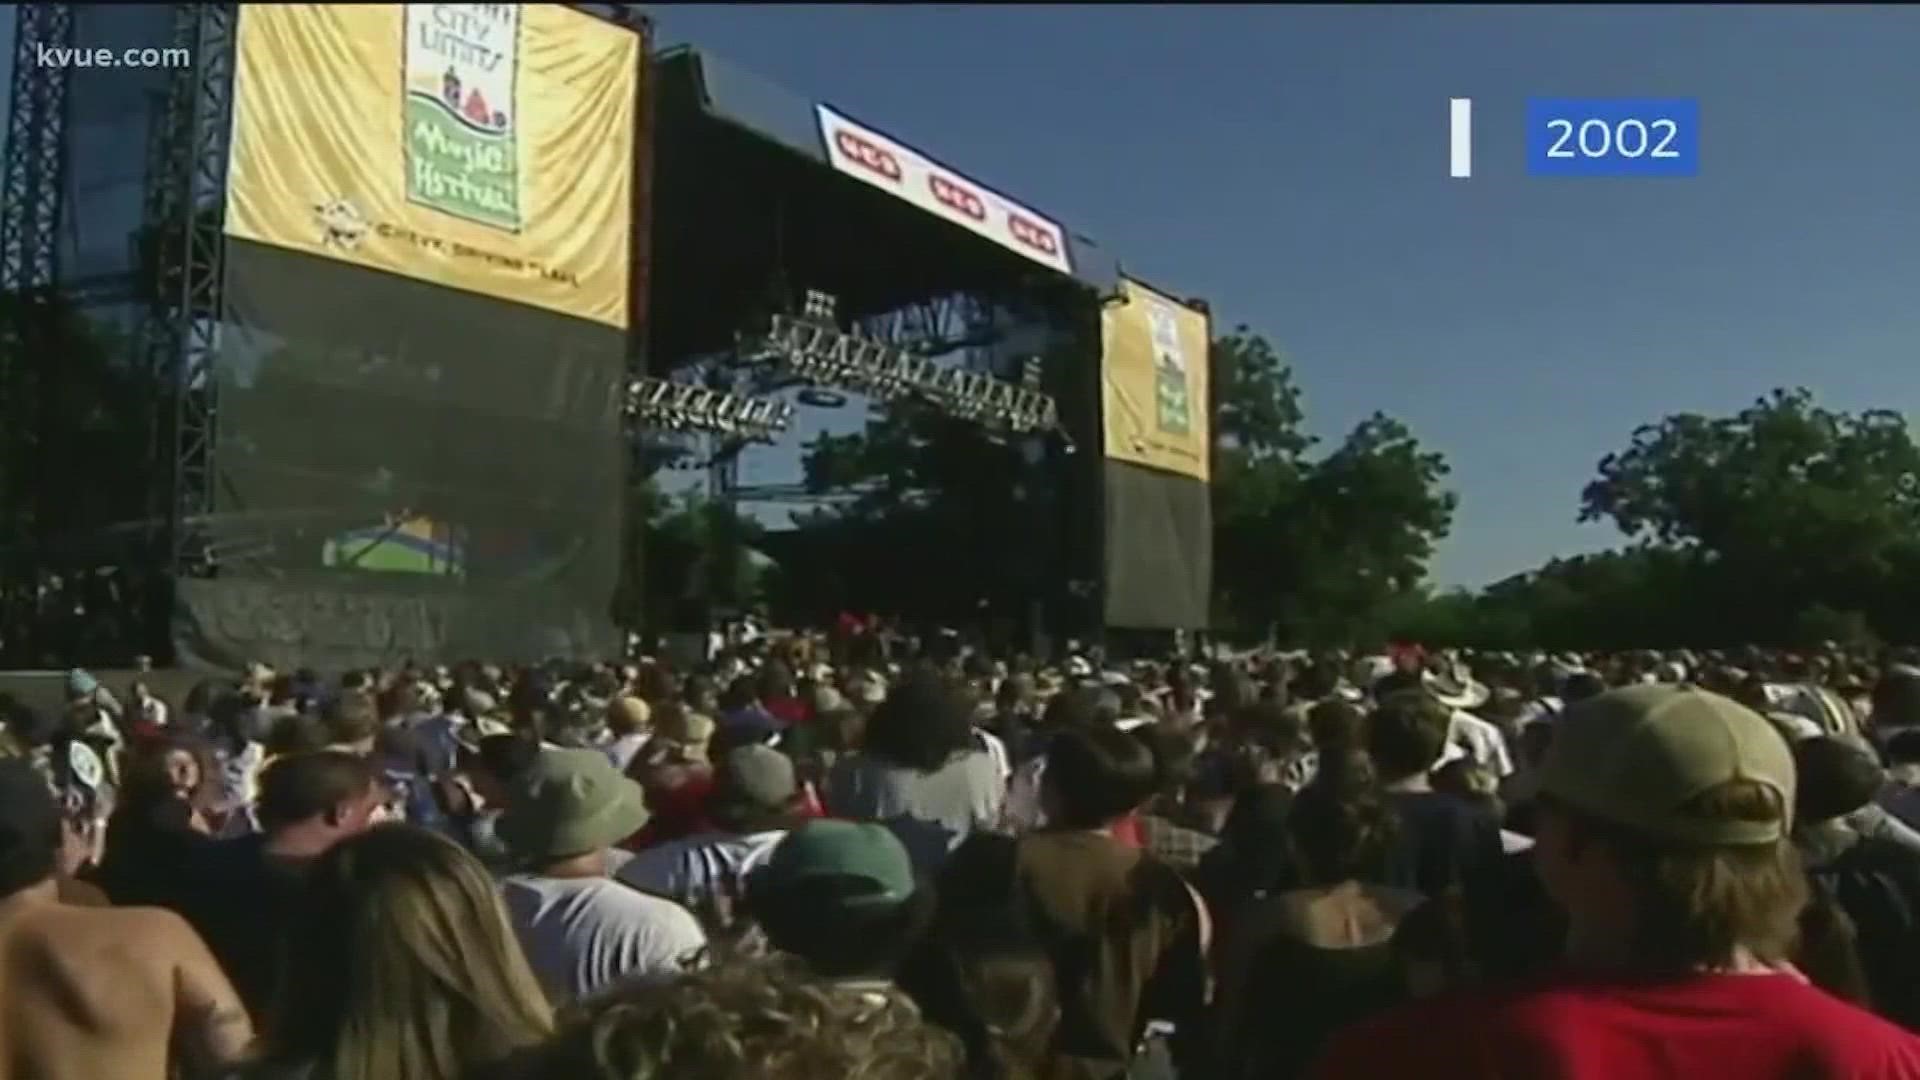 ACL began 20 years ago on a hot September weekend in 2002.